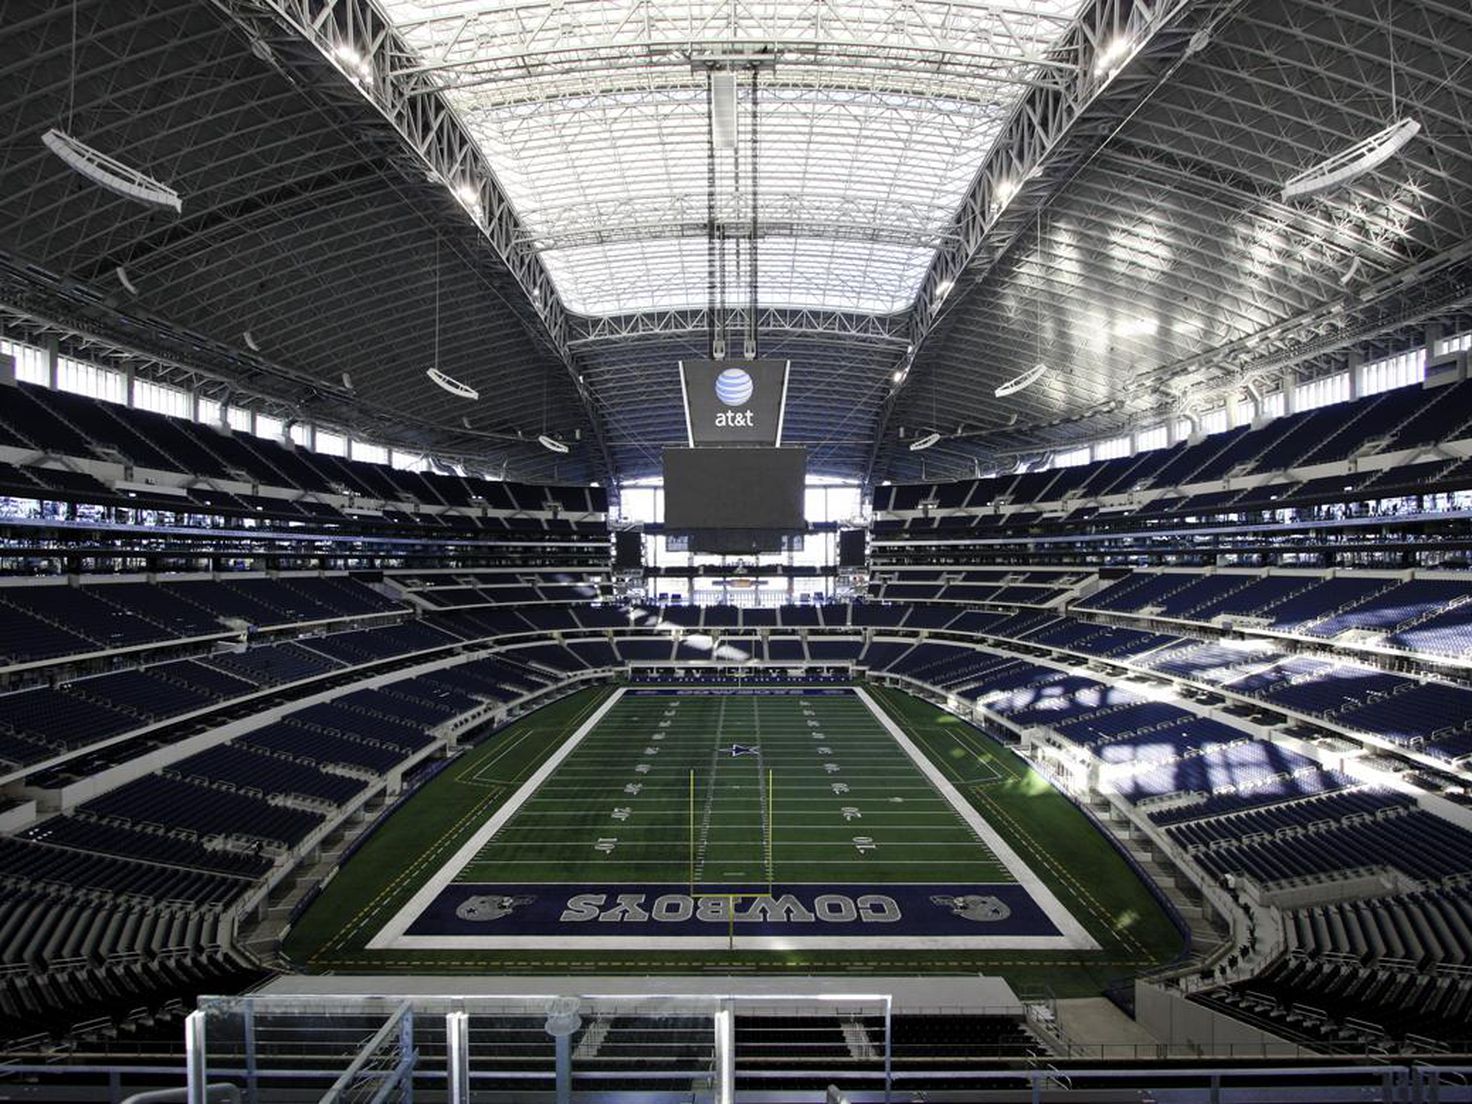 AT&T Stadium: Know Before You Go